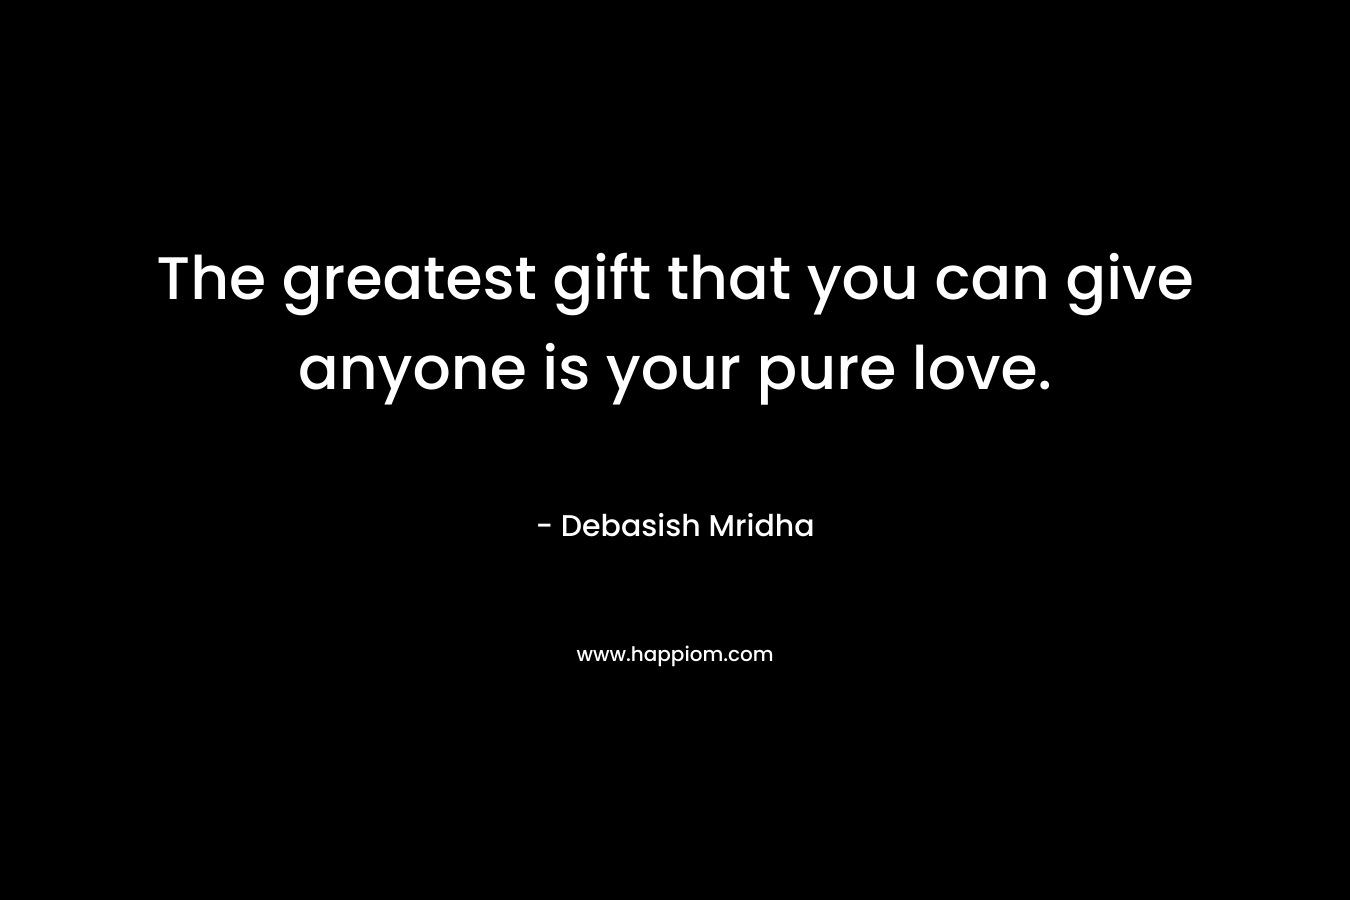 The greatest gift that you can give anyone is your pure love.